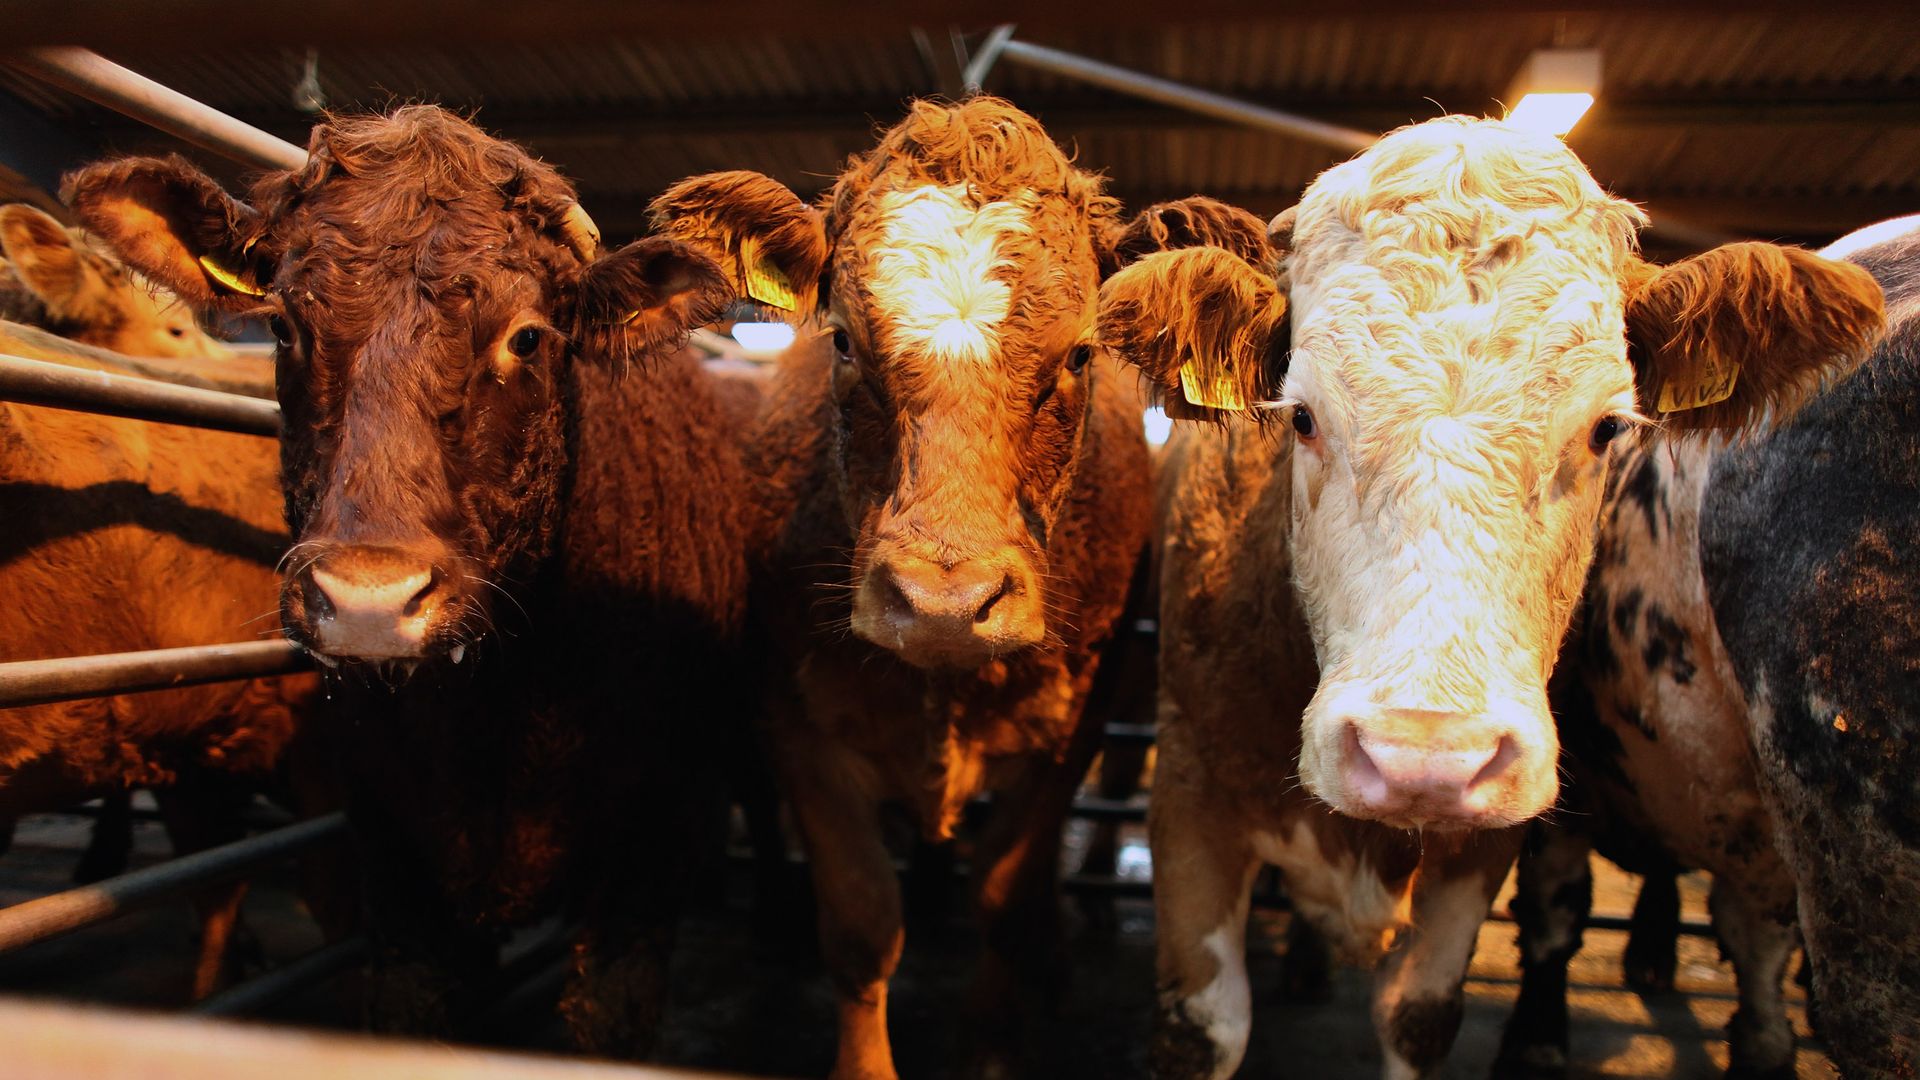  Beef cattle are sold at an auction in Ayr on October 27, 2009 in Ayr, Scotland. 